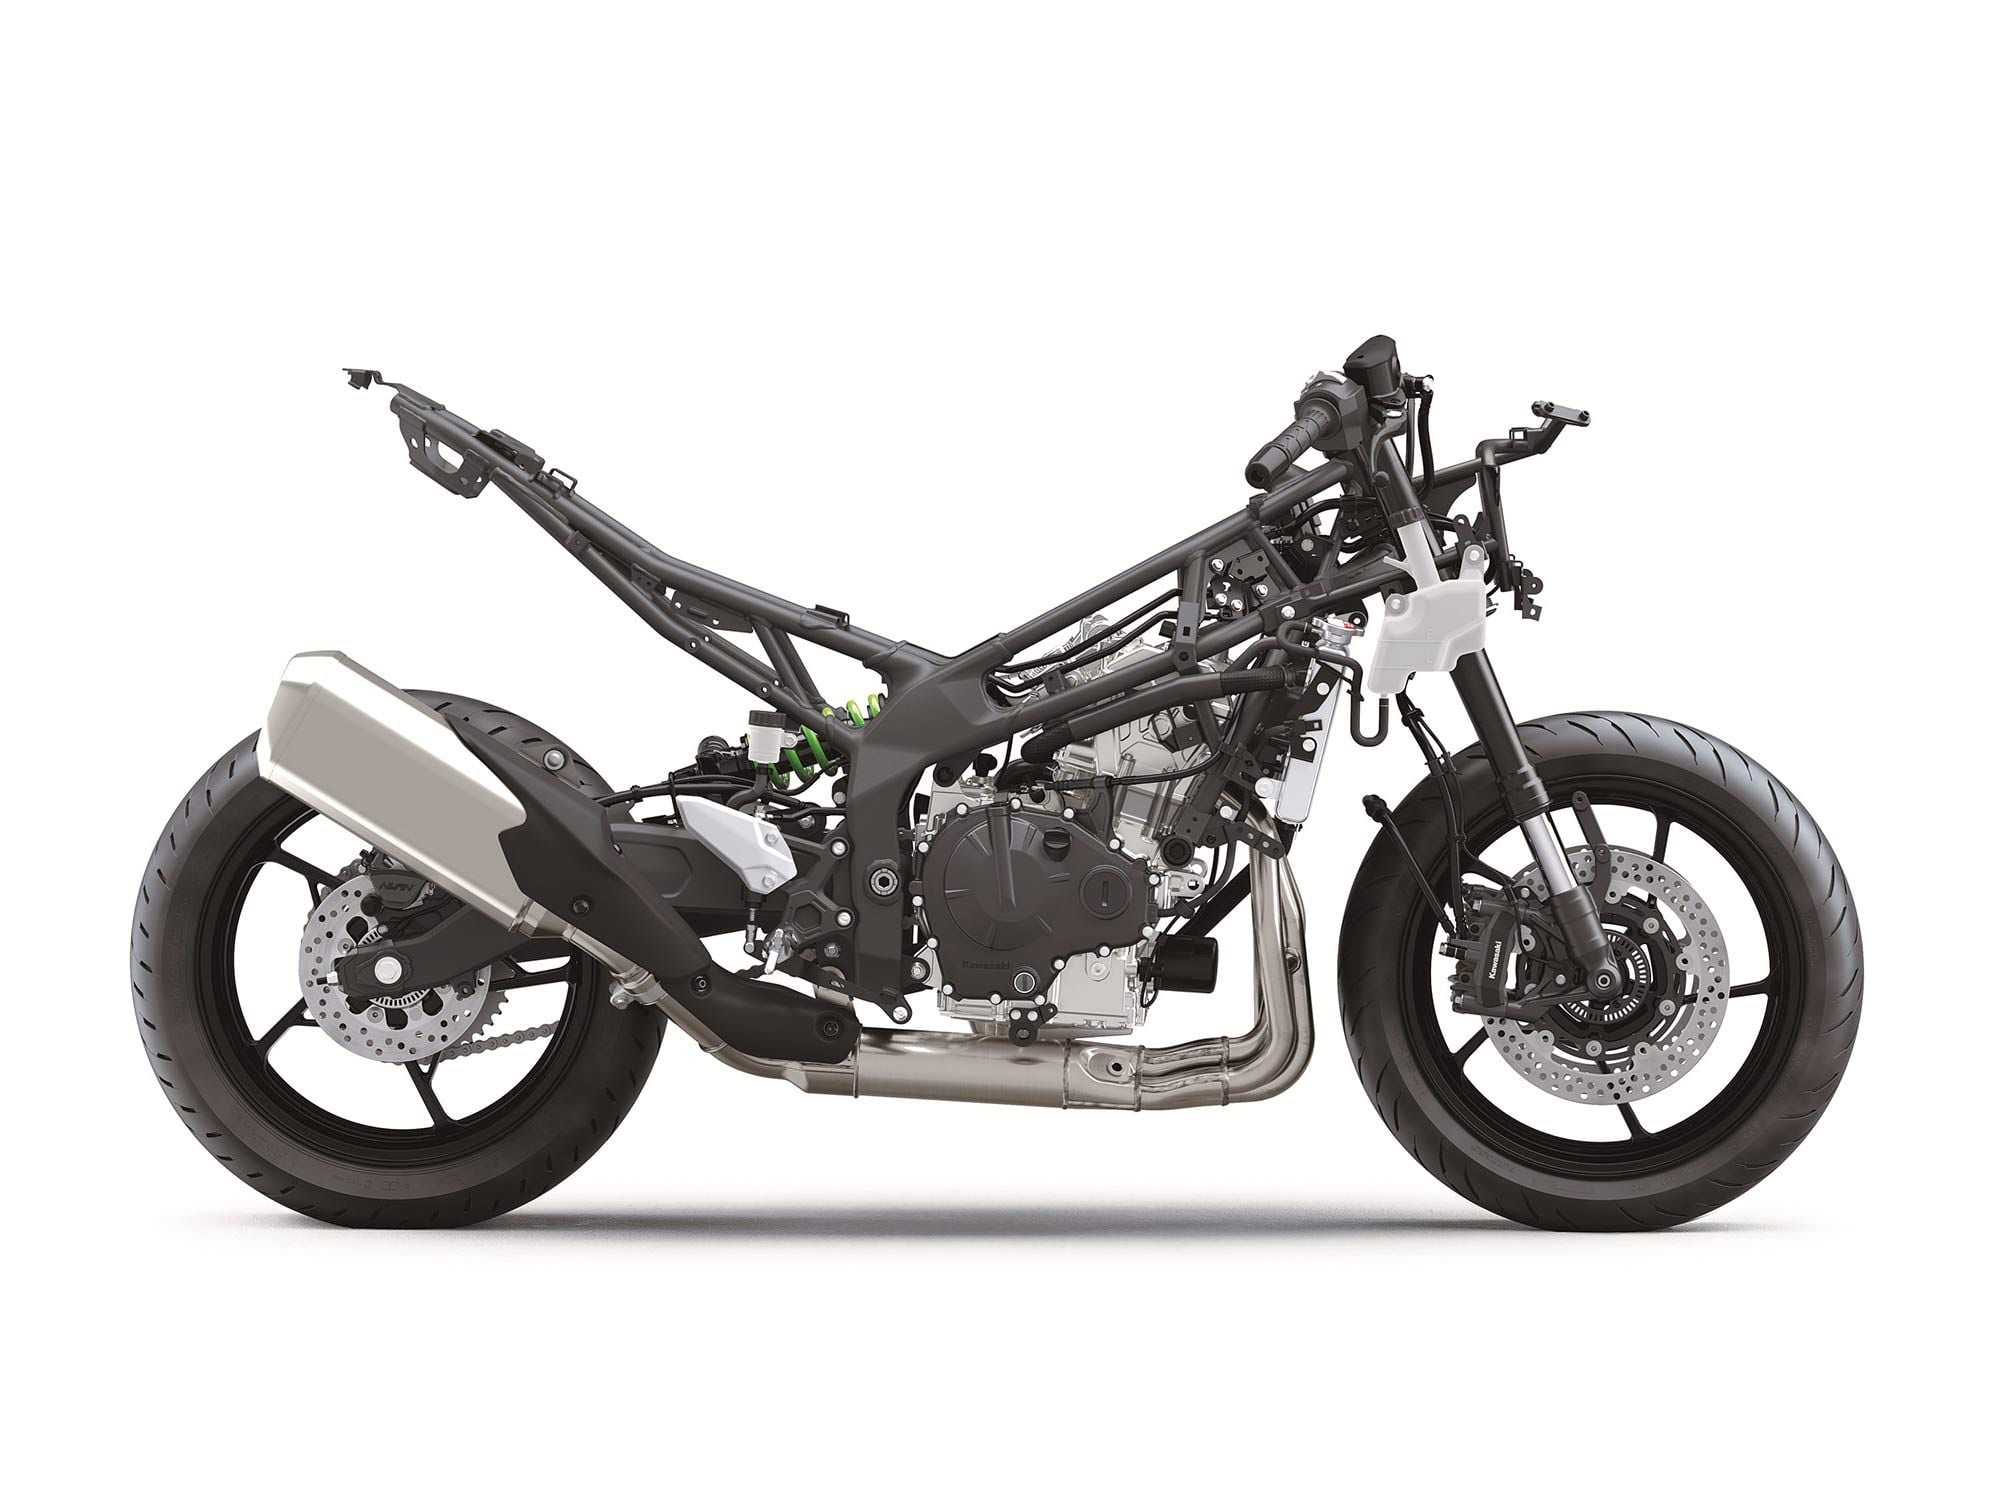 Stripped of its bodywork, you can see the steel-trellis frame and steel banana-style swingarm.